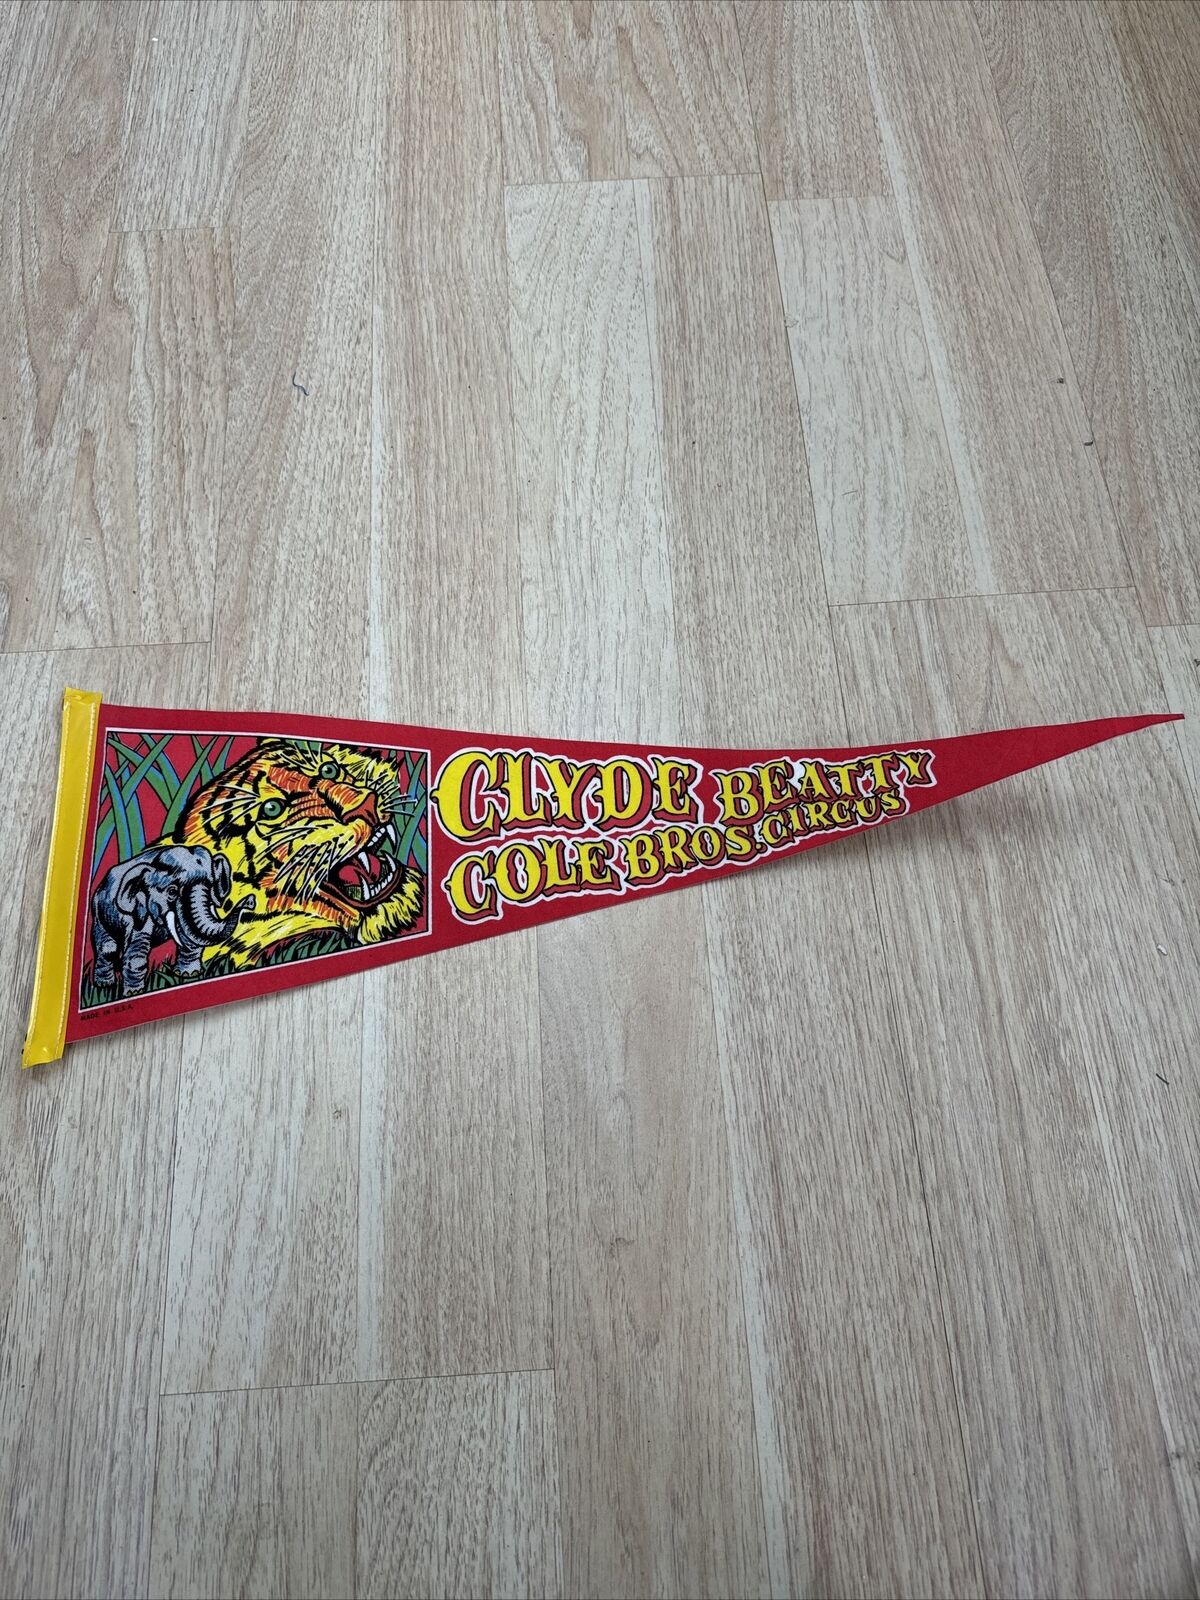 VINTAGE CLYDE BEATTY COLE BROS. CIRCUS PENNANT, 26” Long X 10” Tall. Blue/Yellow